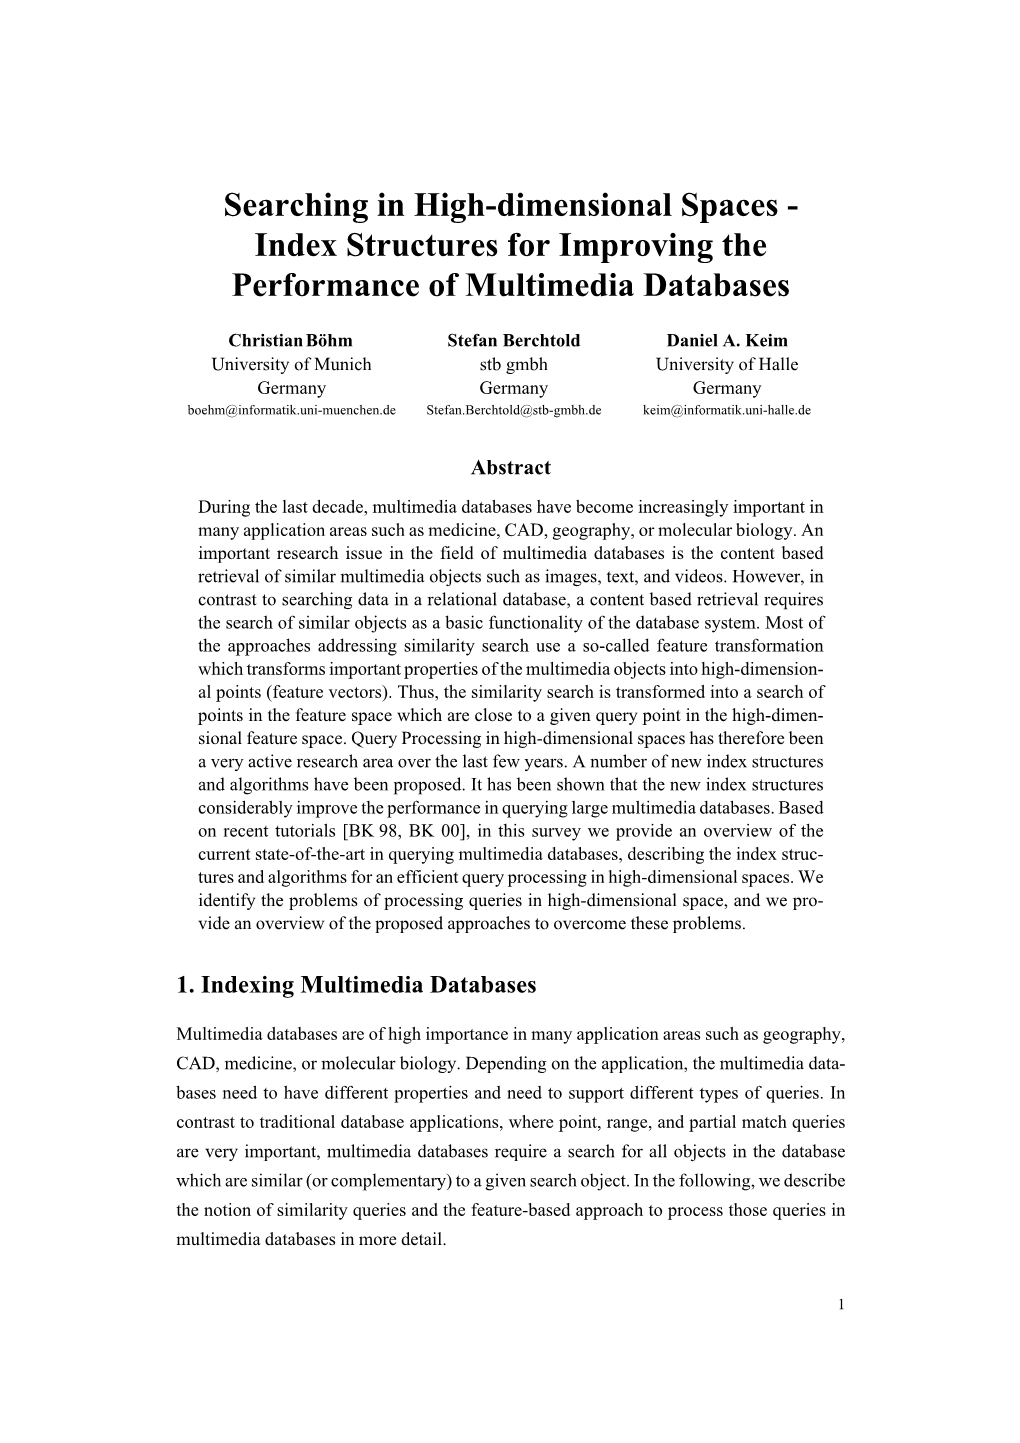 Searching in High-Dimensional Spaces - Index Structures for Improving the Performance of Multimedia Databases